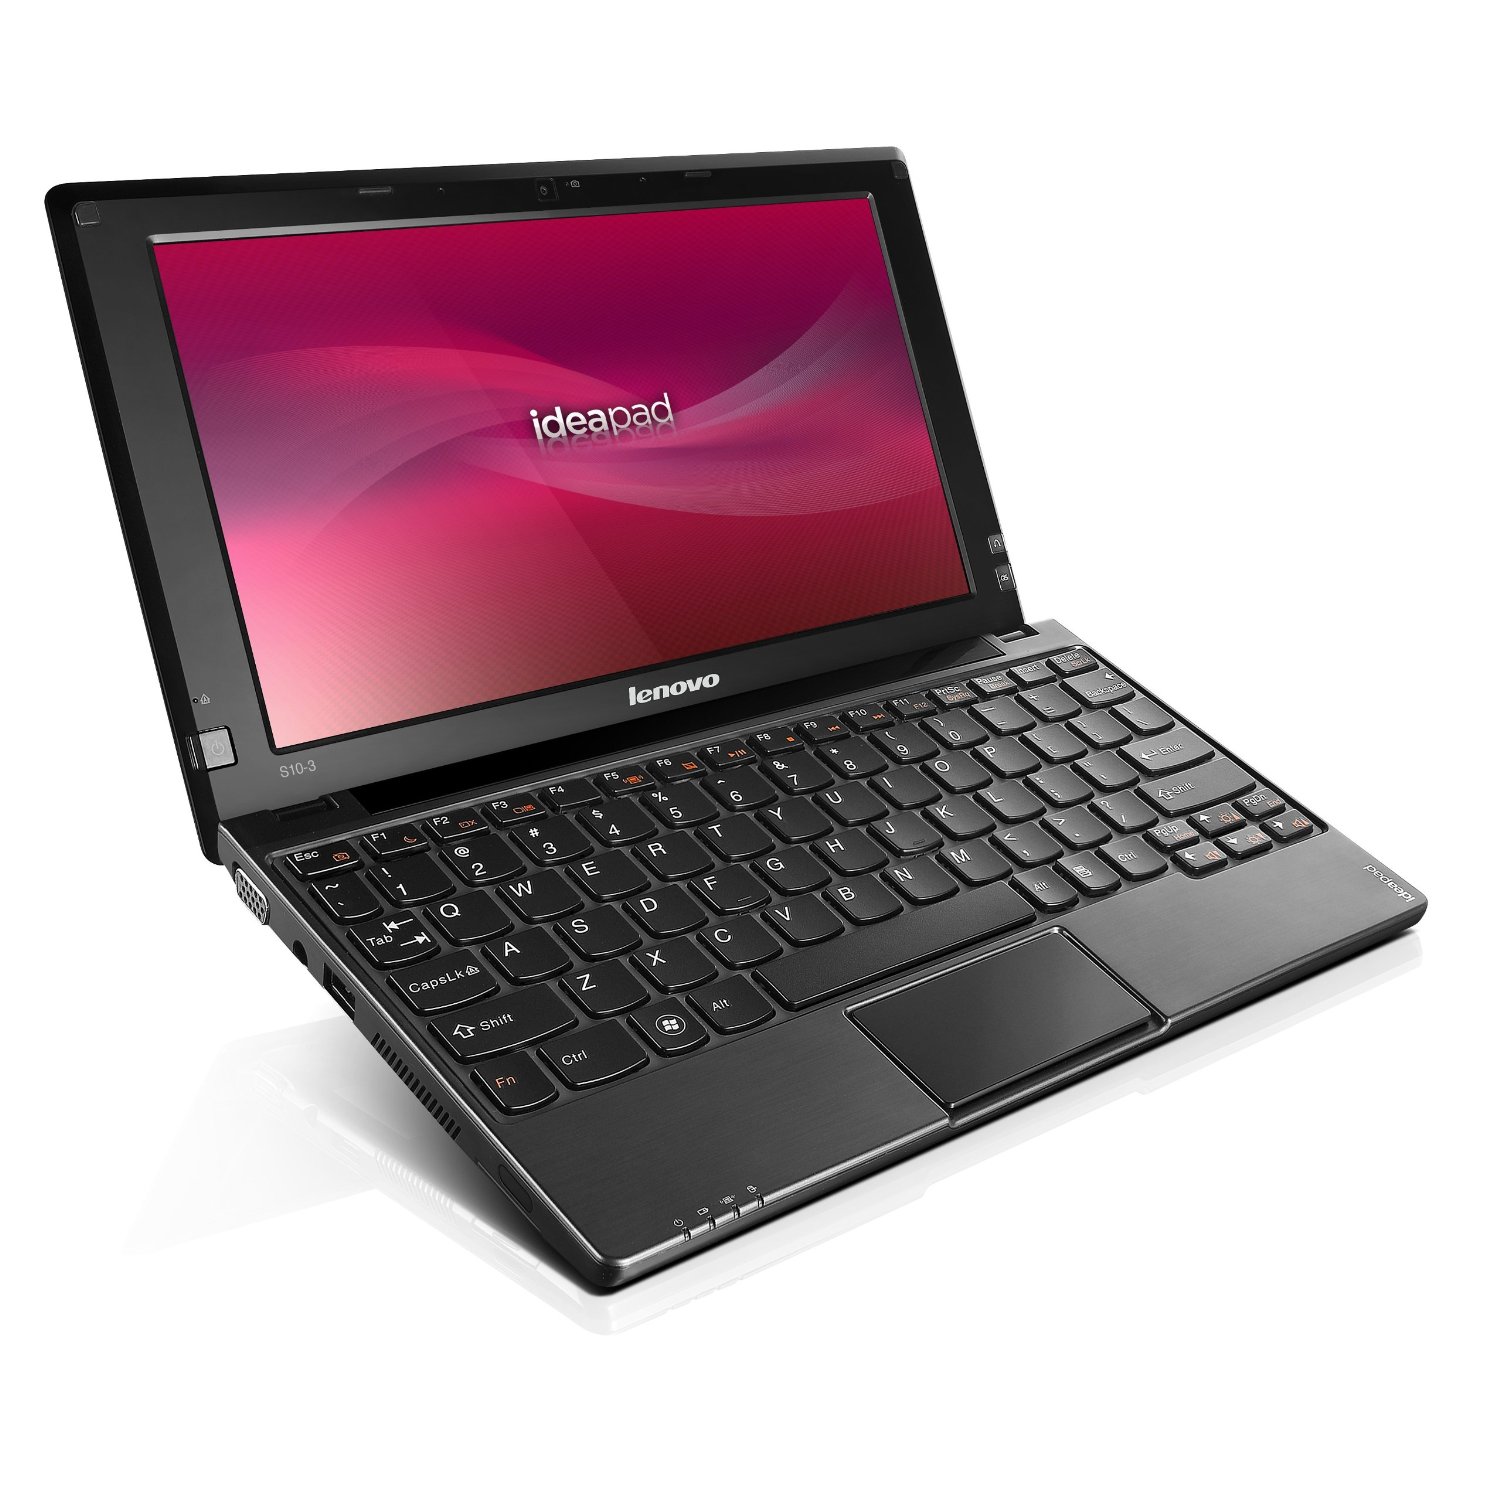 http://thetechjournal.com/wp-content/uploads/images/1112/1322935275-lenovo-ideapad-s103-06472au-101inch-netbook-6.jpg